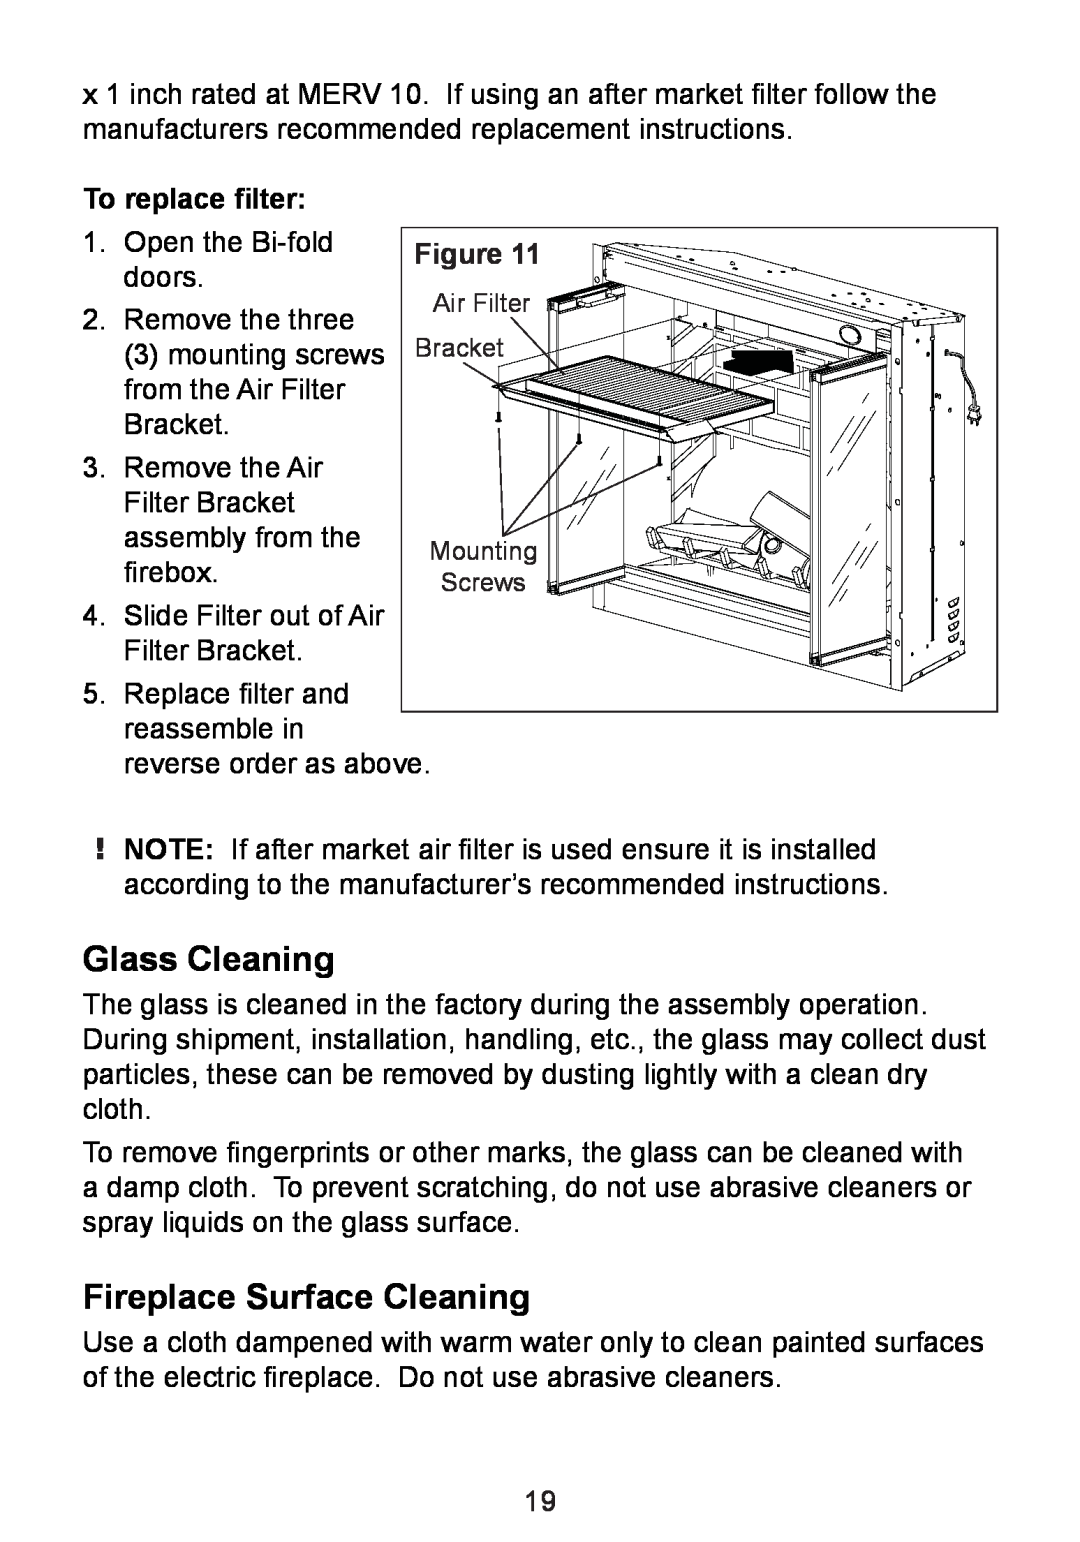 Dimplex DF3215NH owner manual Glass Cleaning, Fireplace Surface Cleaning, To replace filter 